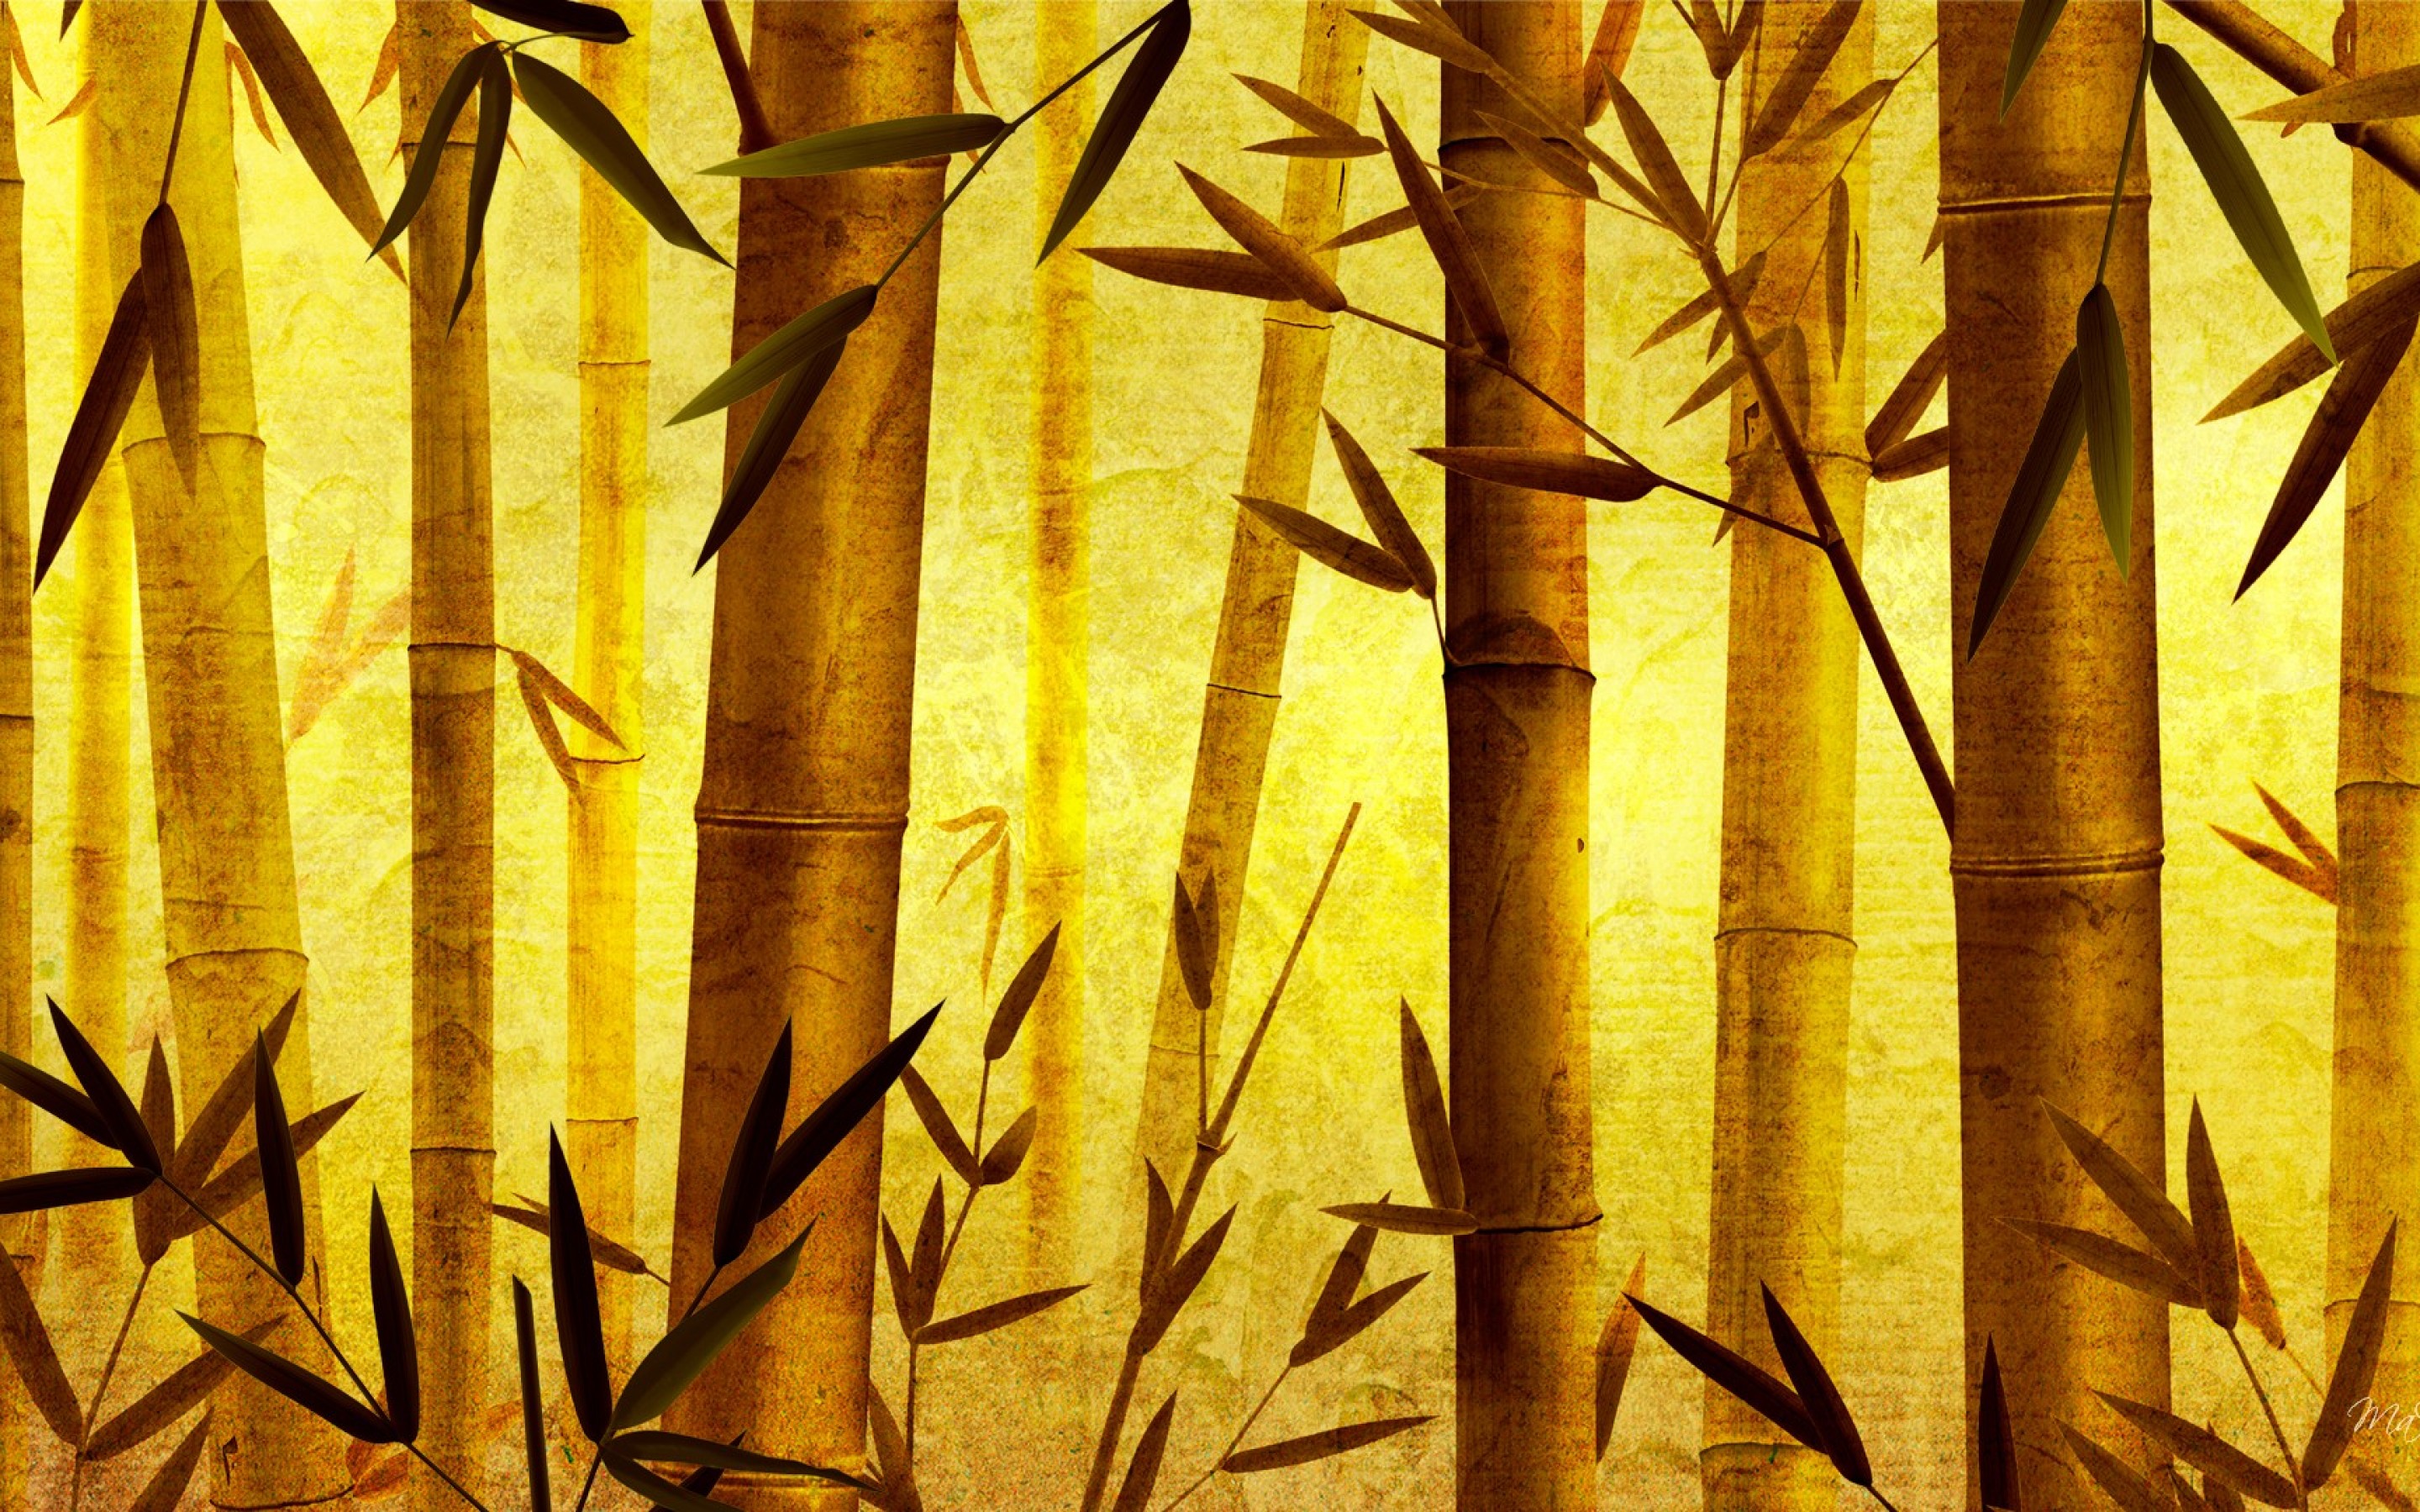 Bamboo forest wallpaper | 3d and abstract | Wallpaper Better